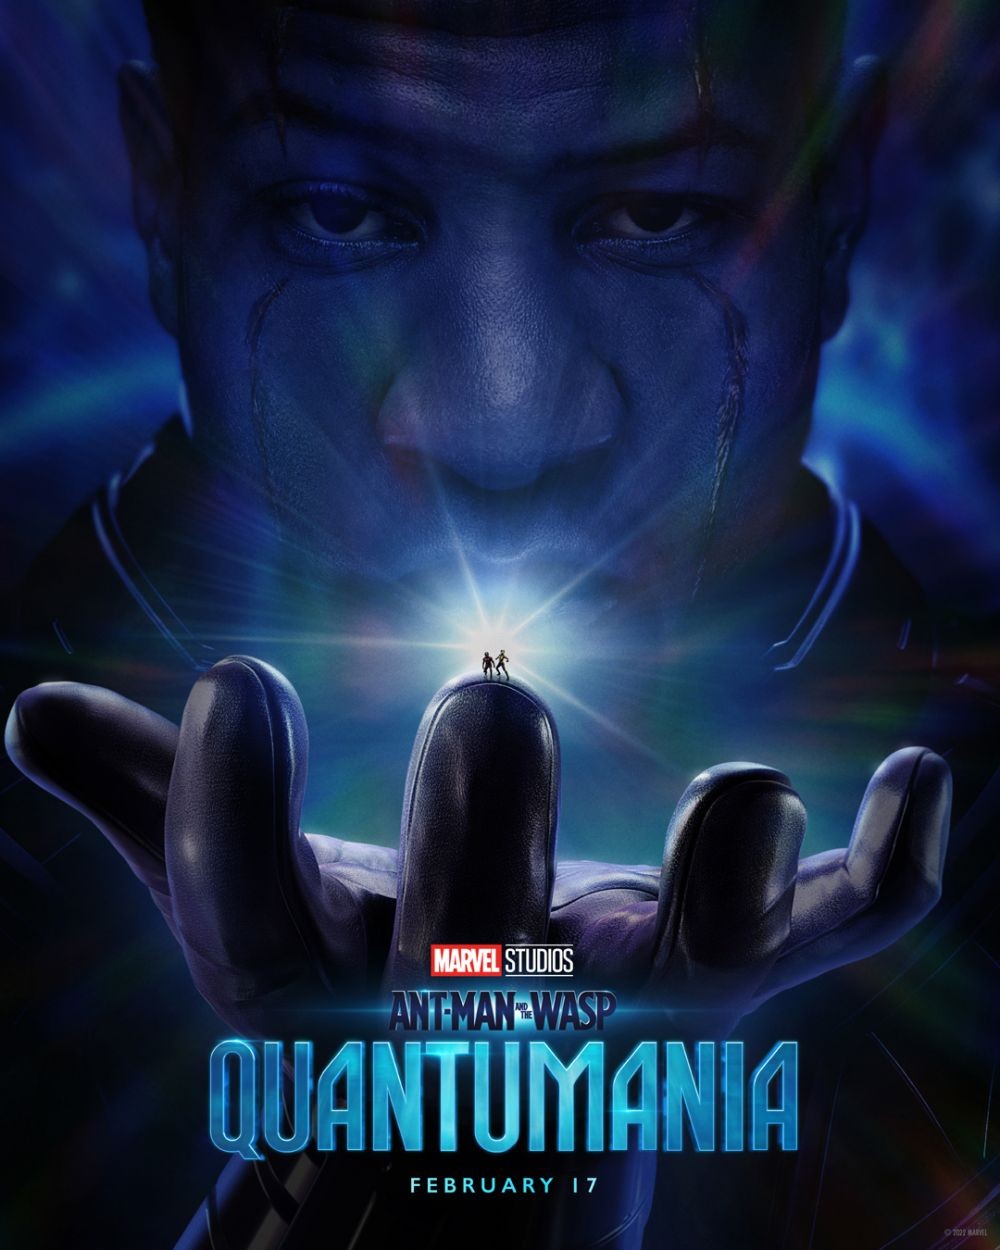 Poster resmi Ant-Man and the Wasp: Quantumania. (Dok. Marvel Studios/Ant-Man and the Wasp: Quantumania)